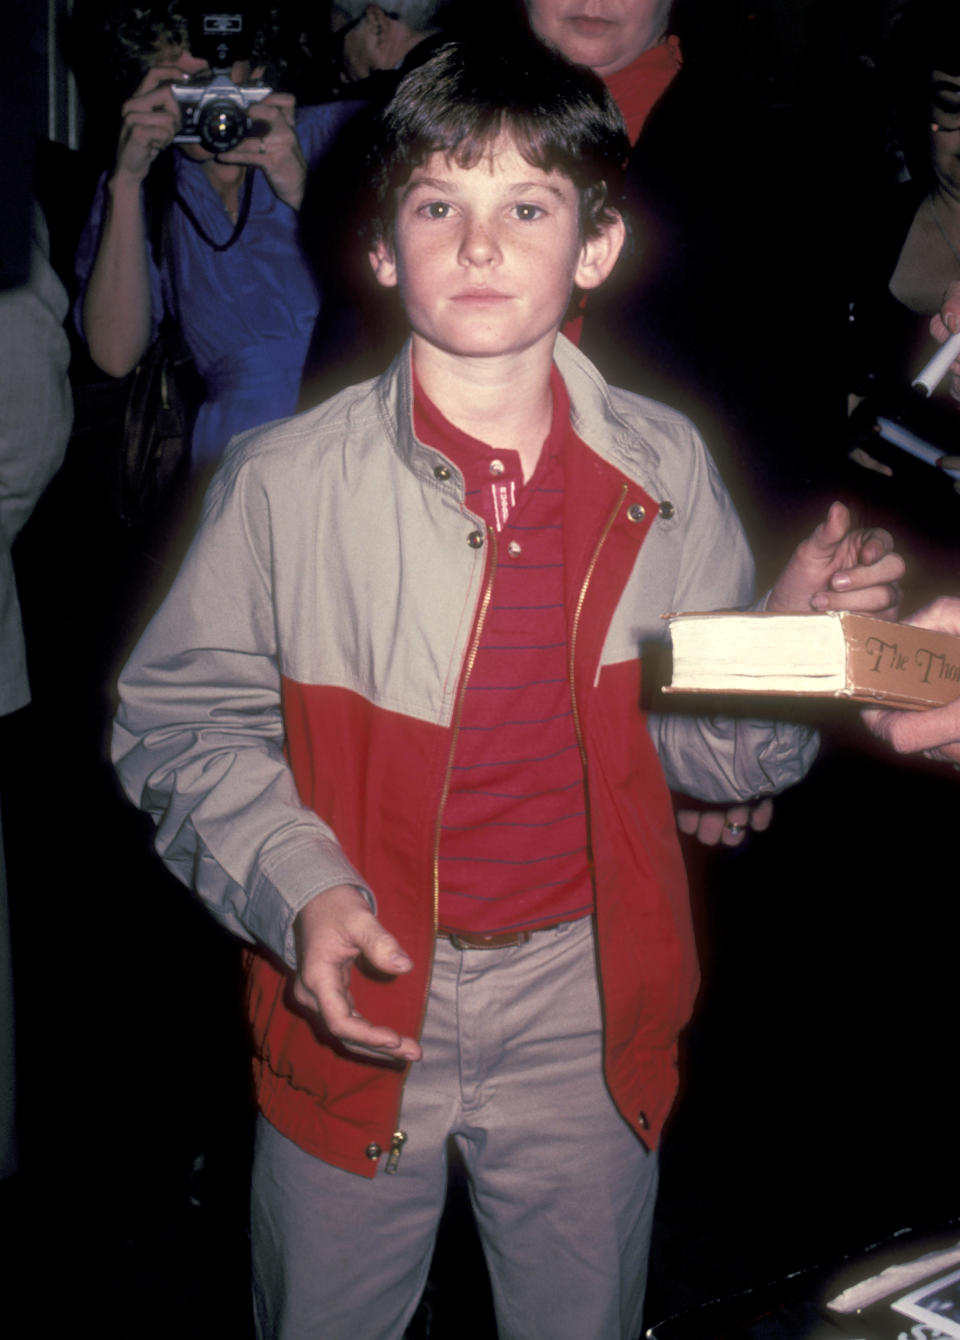 Actor Henry Thomas on March 1, 1983 leaving the Beverly Hilton Hotel in Beverly Hills, California. (Photo by Ron Galella, Ltd./Ron Galella Collection via Getty Images)